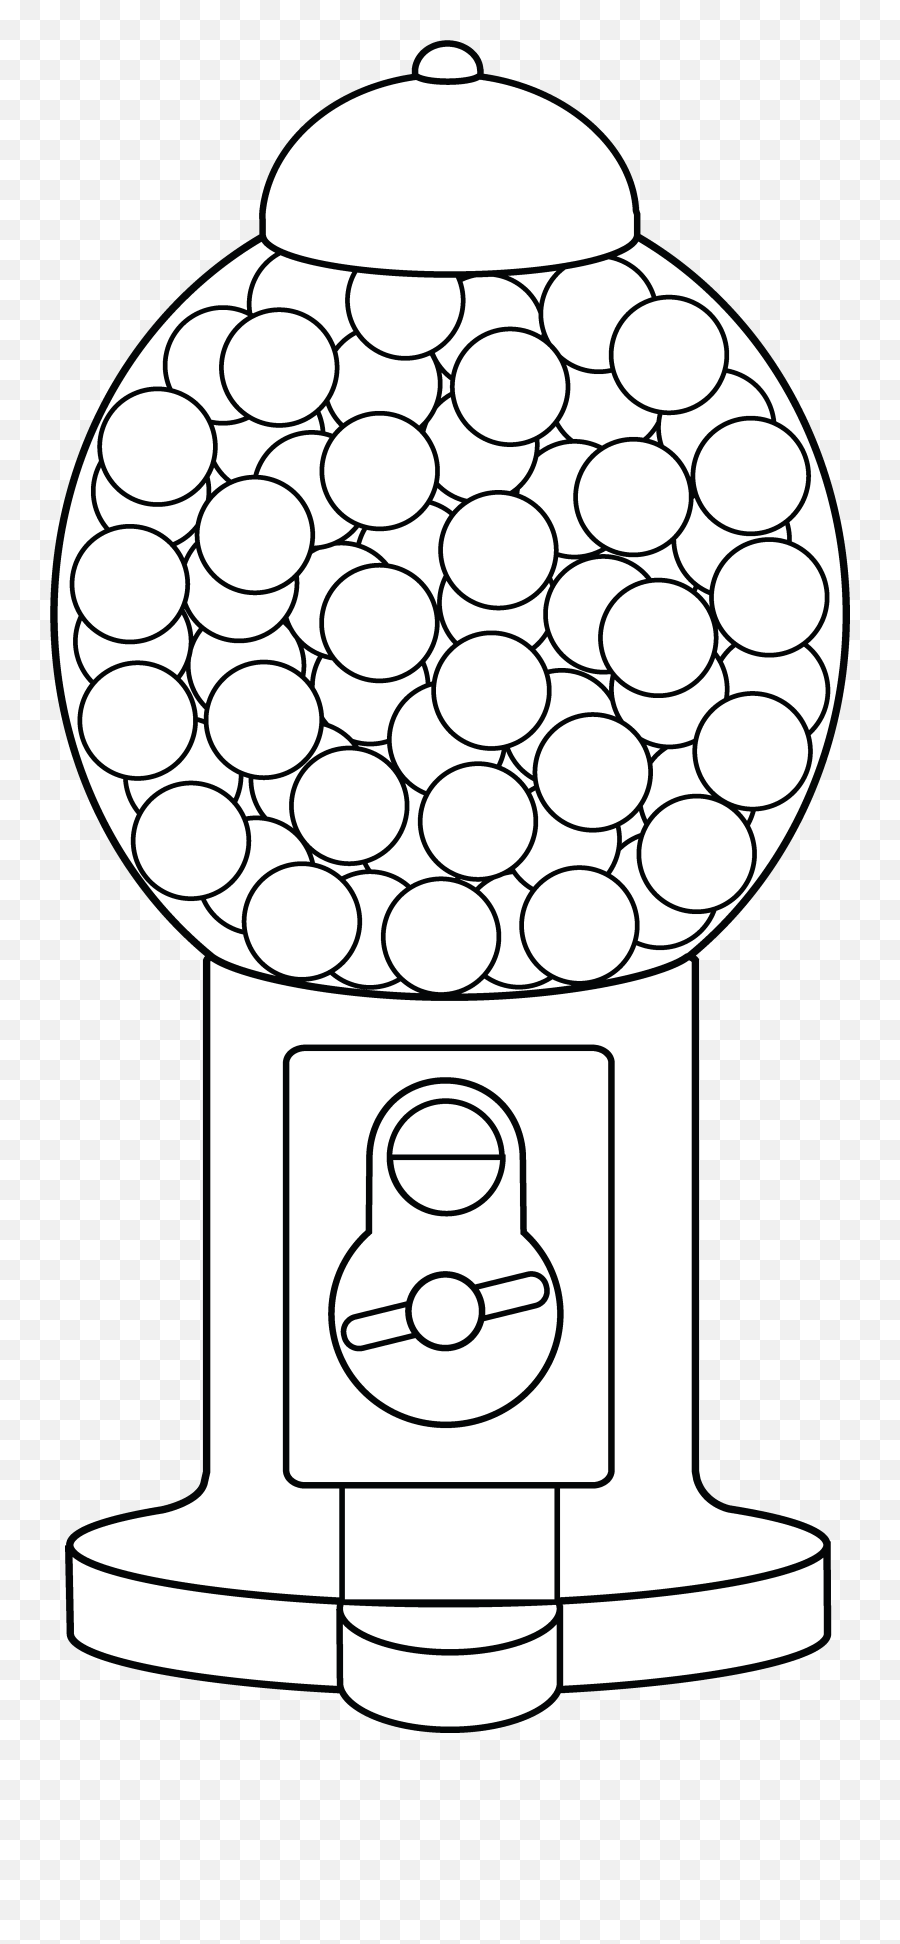 Candy Coloring Pages Coloring Pages - Gumball Machine Coloring Pages Emoji,Stir It Up The Novel Book Pages Emotion Reipes